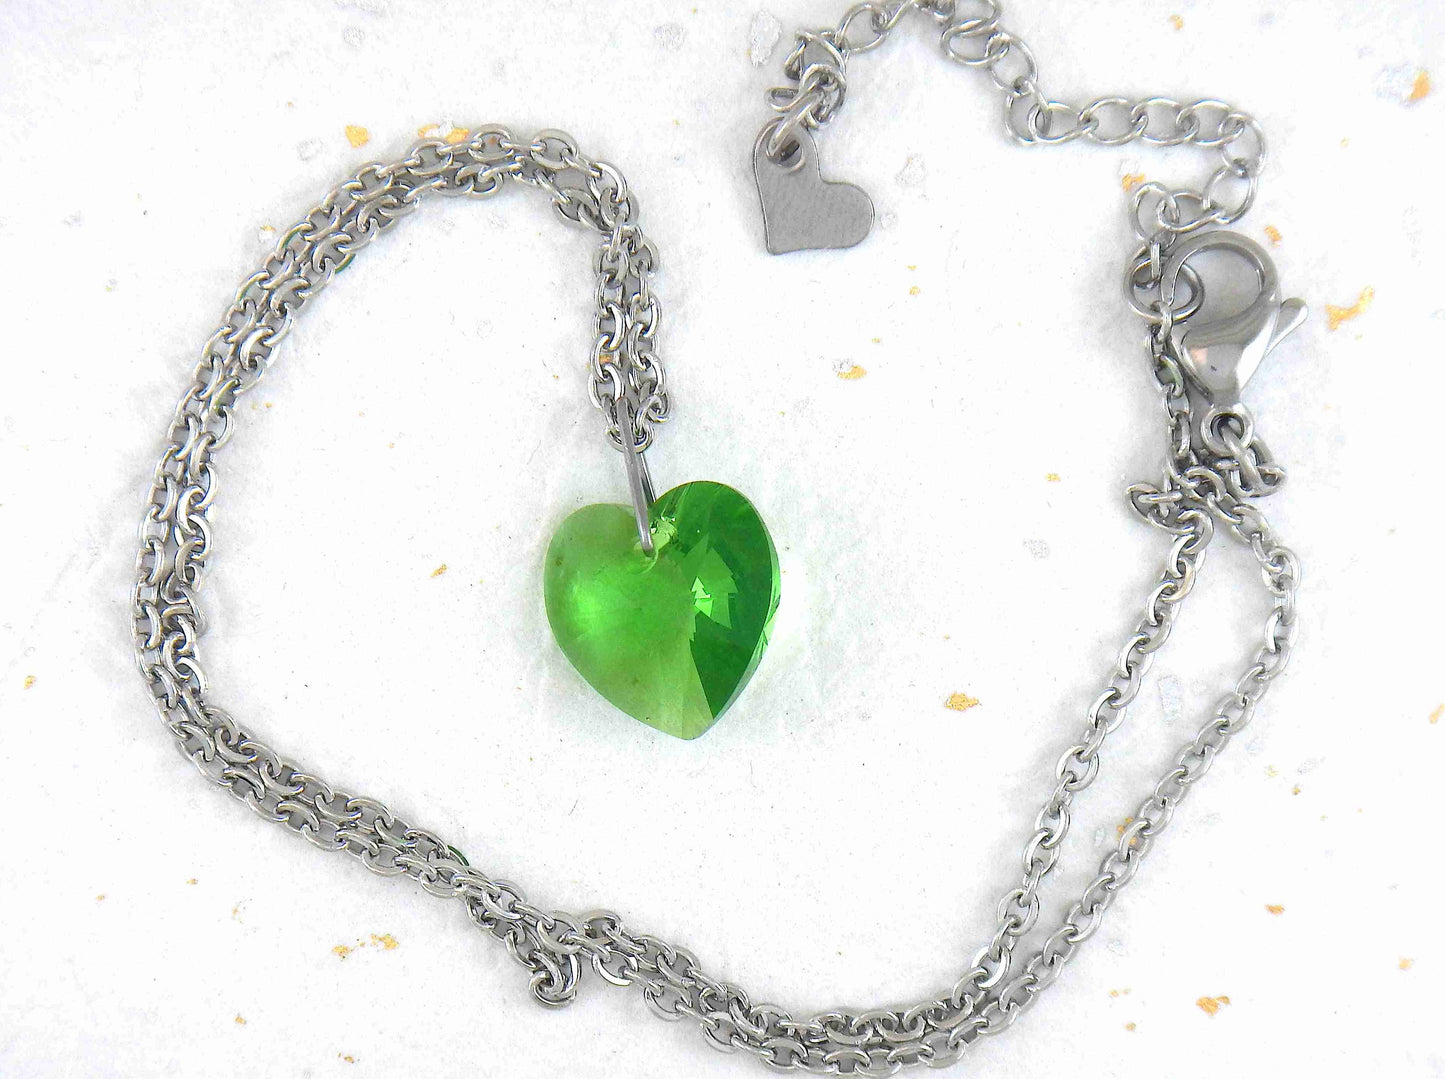 14/16-inch necklace with 14mm Fern Green faceted Swarovski crystal heart pendant, stainless steel chain